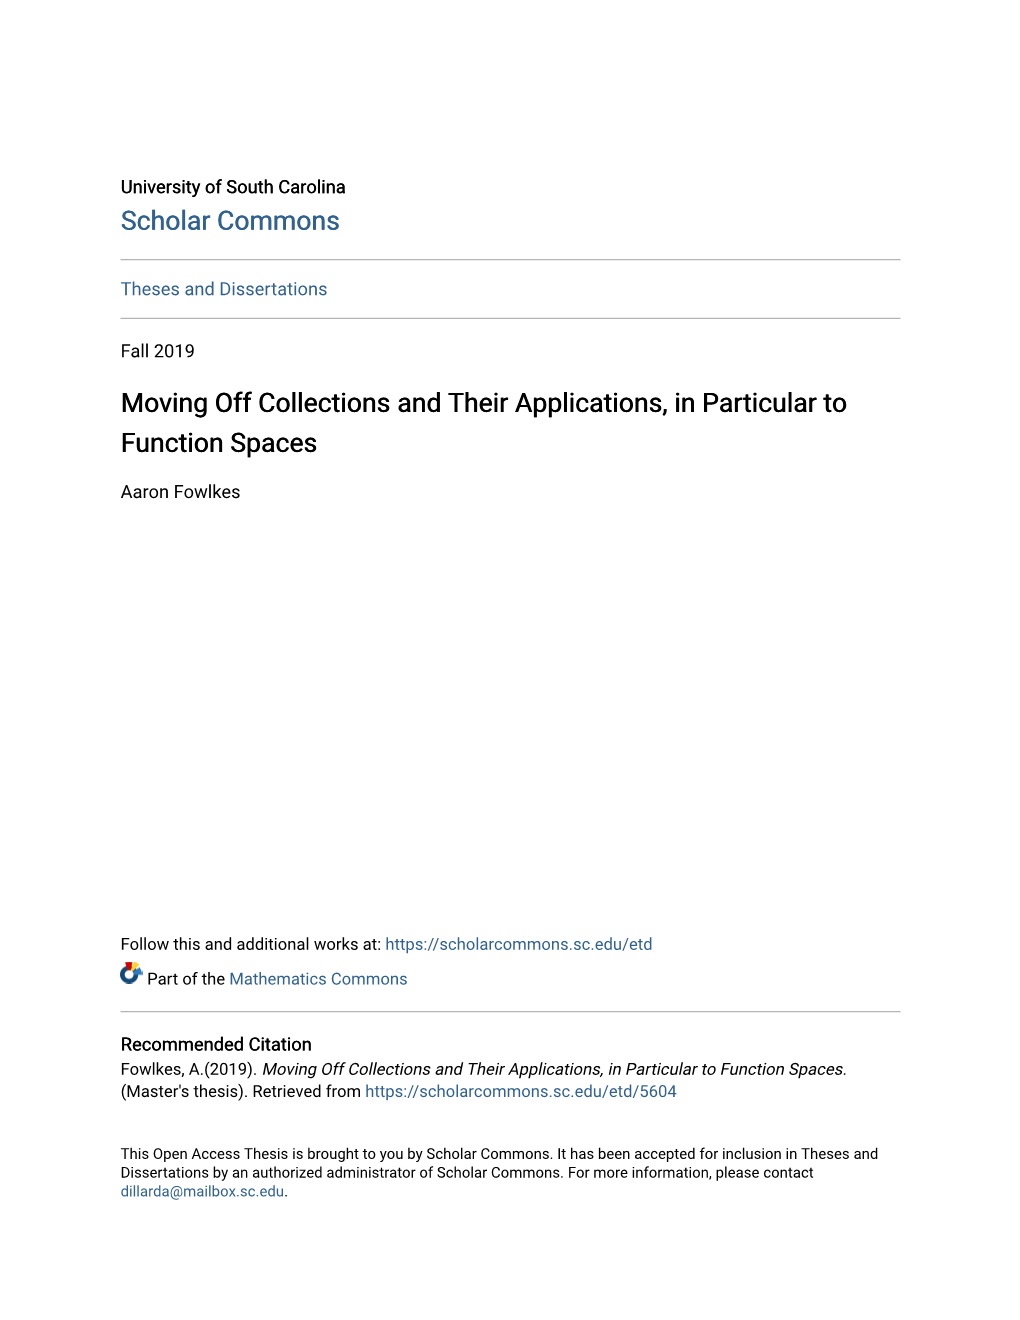 Moving Off Collections and Their Applications, in Particular to Function Spaces